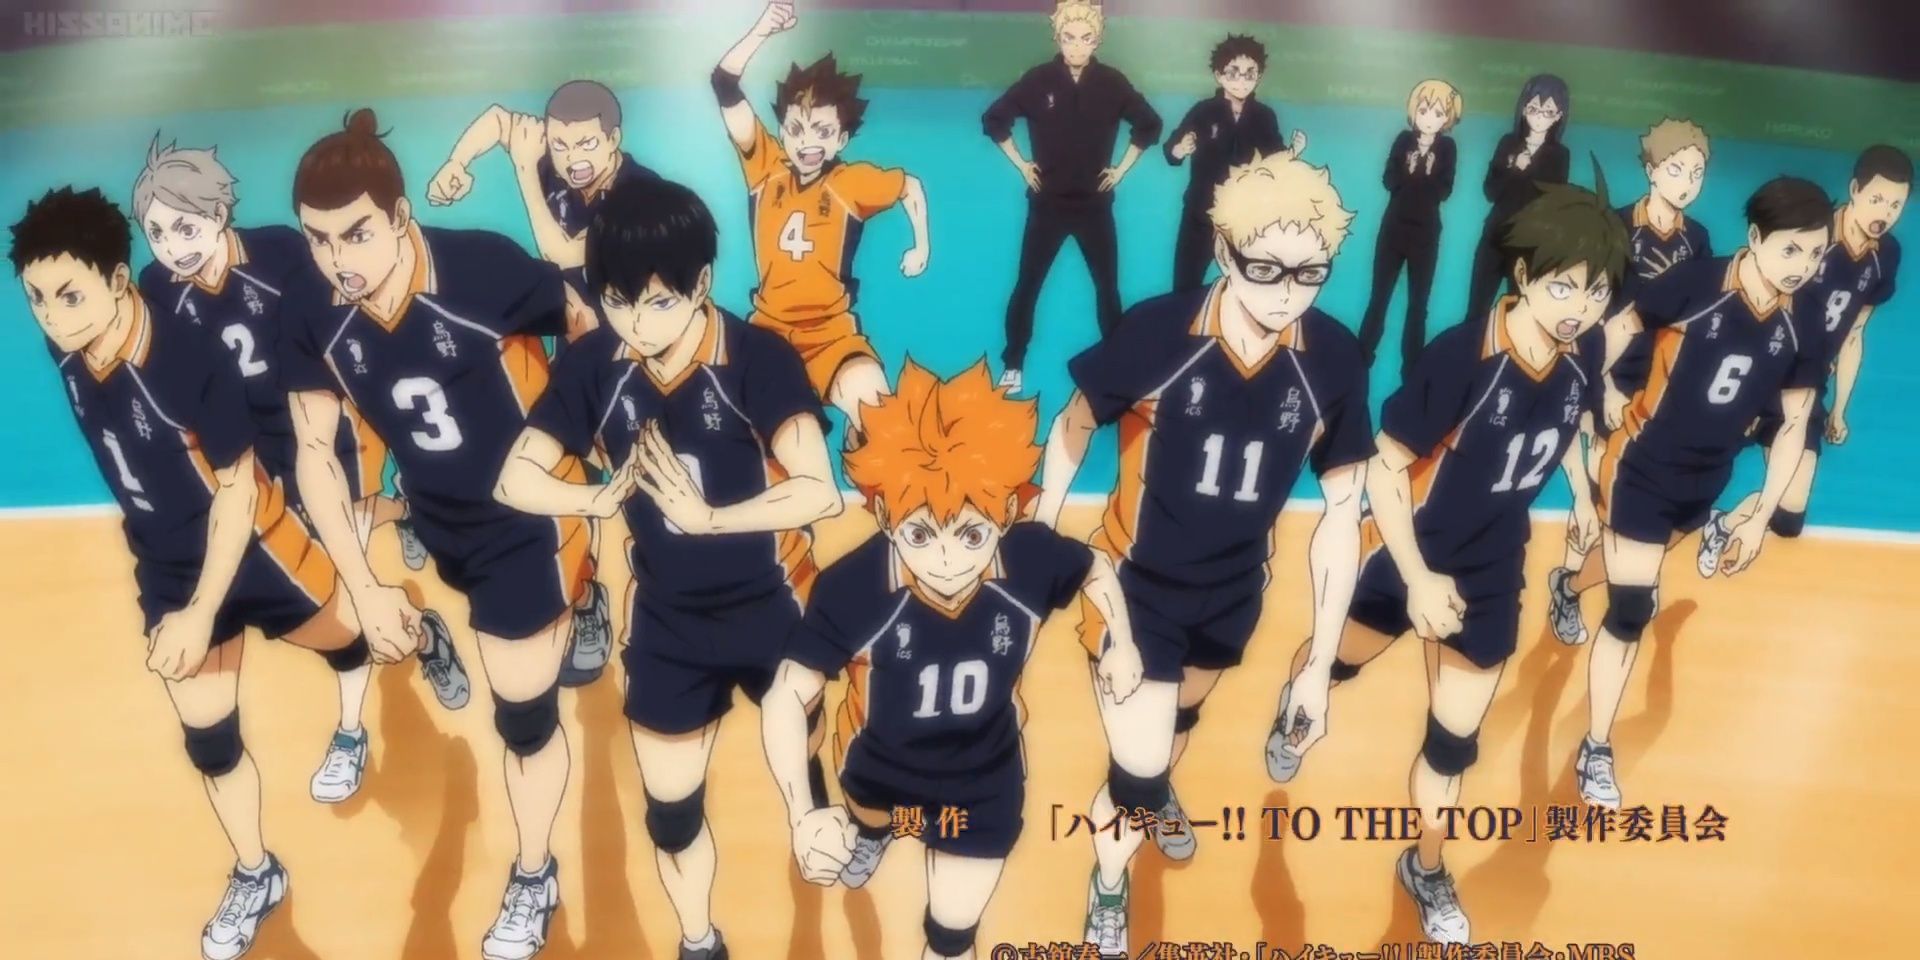 The Karasuno High volleyball team determinedly entering the court in Haikyuu!!